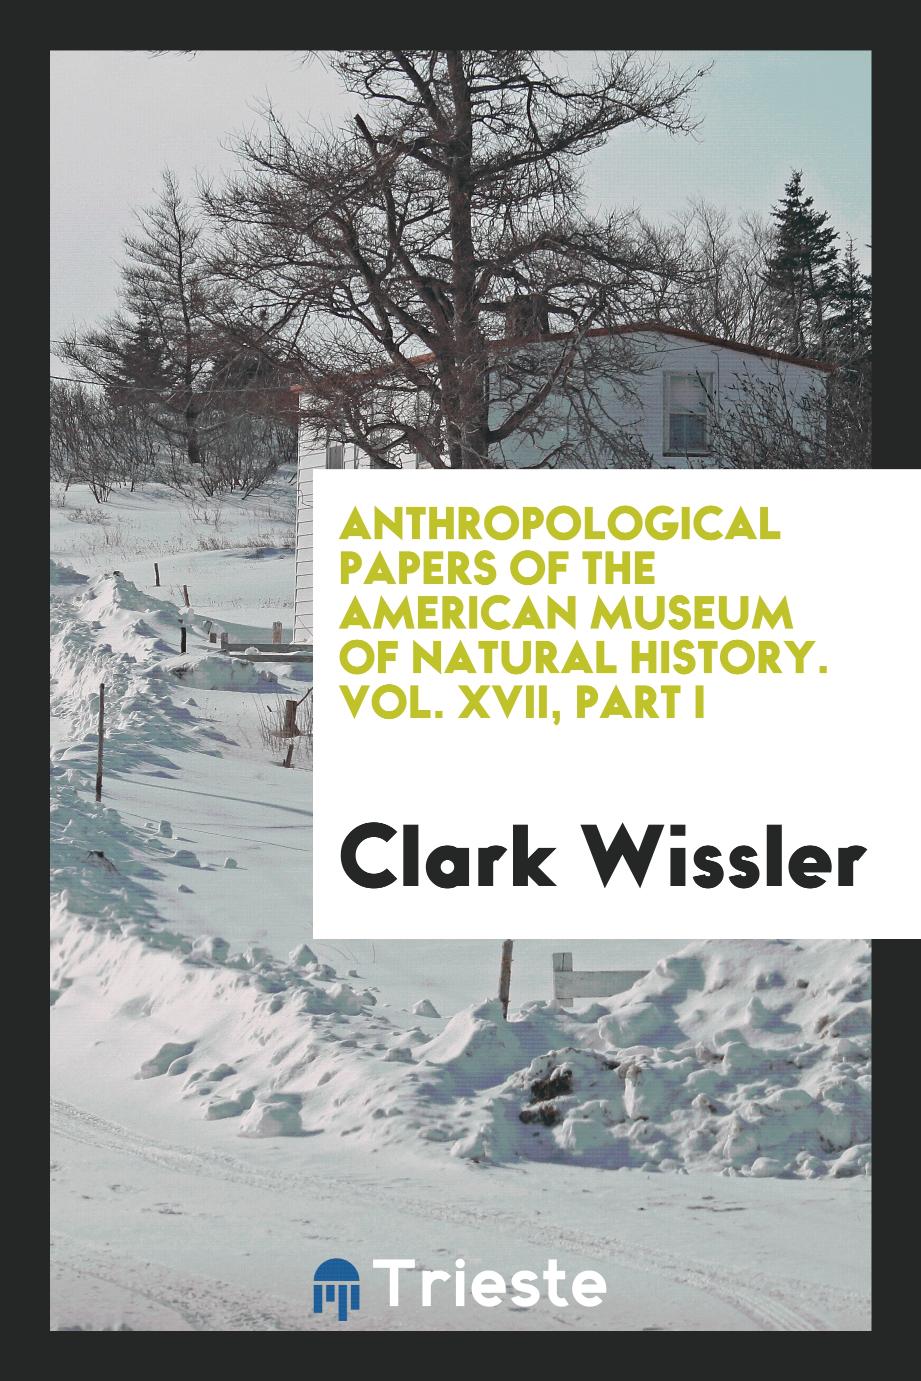 Anthropological Papers of the American Museum of Natural History. Vol. XVII, Part I